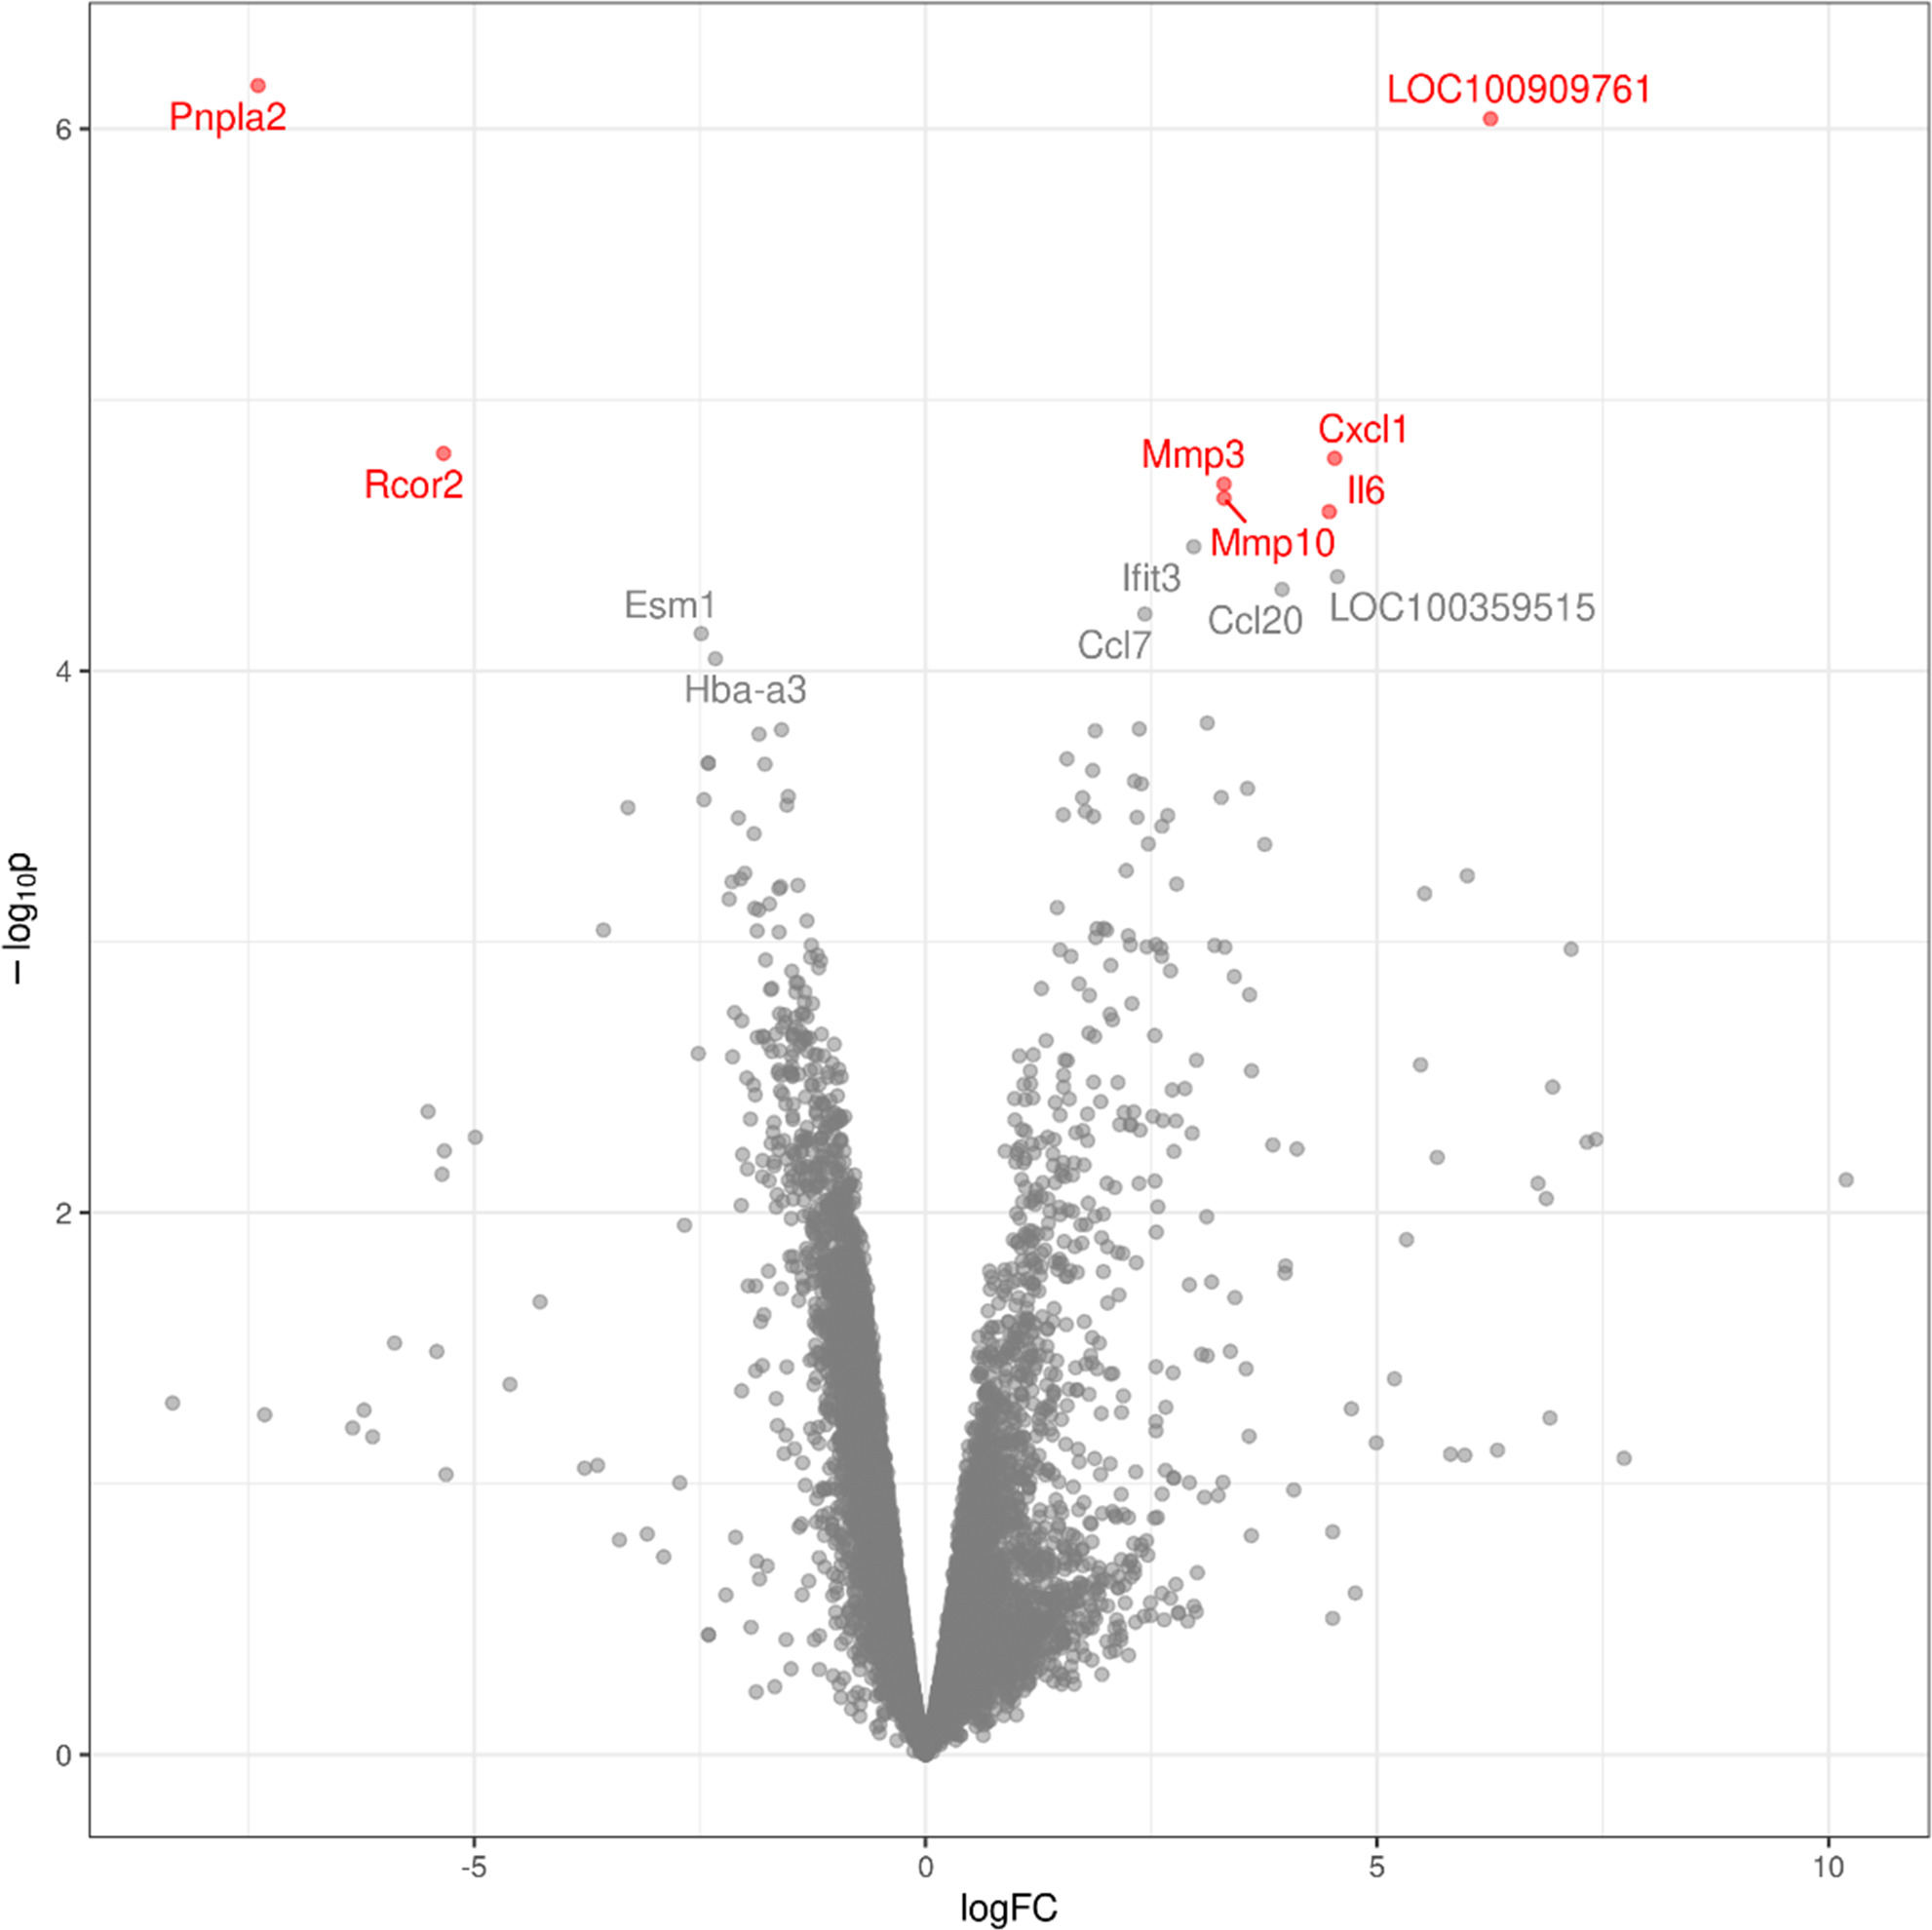 Fig. 3 
            Volcano plot with significant genes shown in red (FDR < 0.05). Genes to a FDR of 10.0% are additionally labelled in grey. FDR, false discovery rate; Mmp, matrix metallopeptidase; Pnpla2, Patatin-like phospholipase domain-containing protein 2.
          